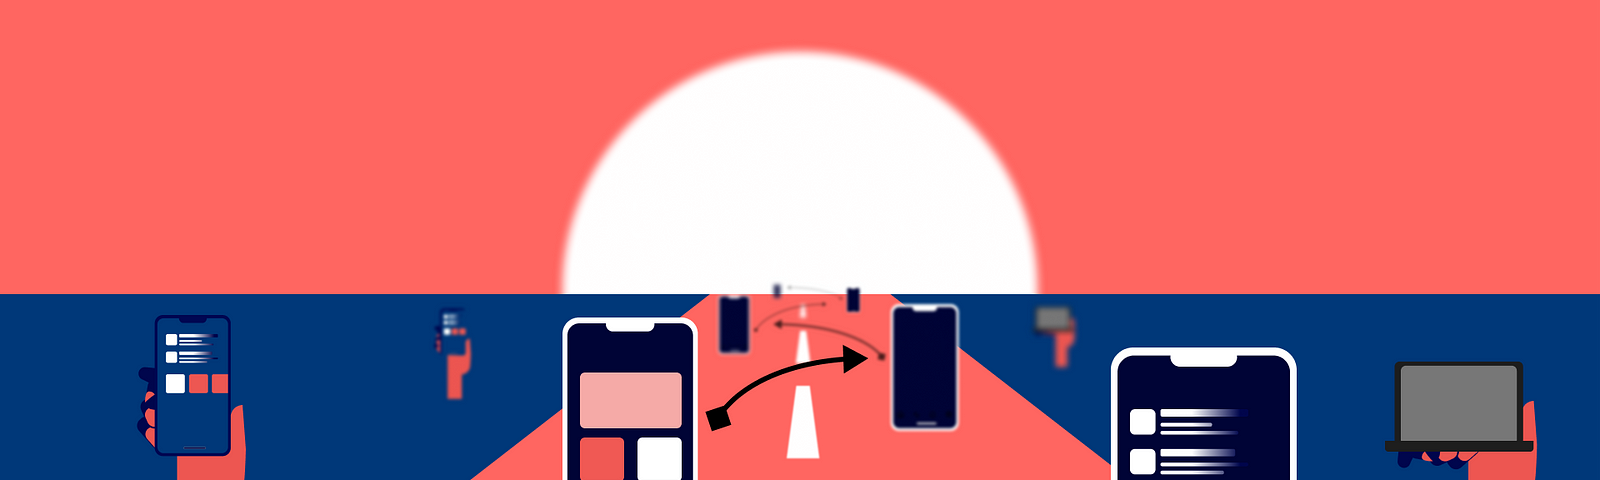 Hero image showing a road into the distance with devices connected together